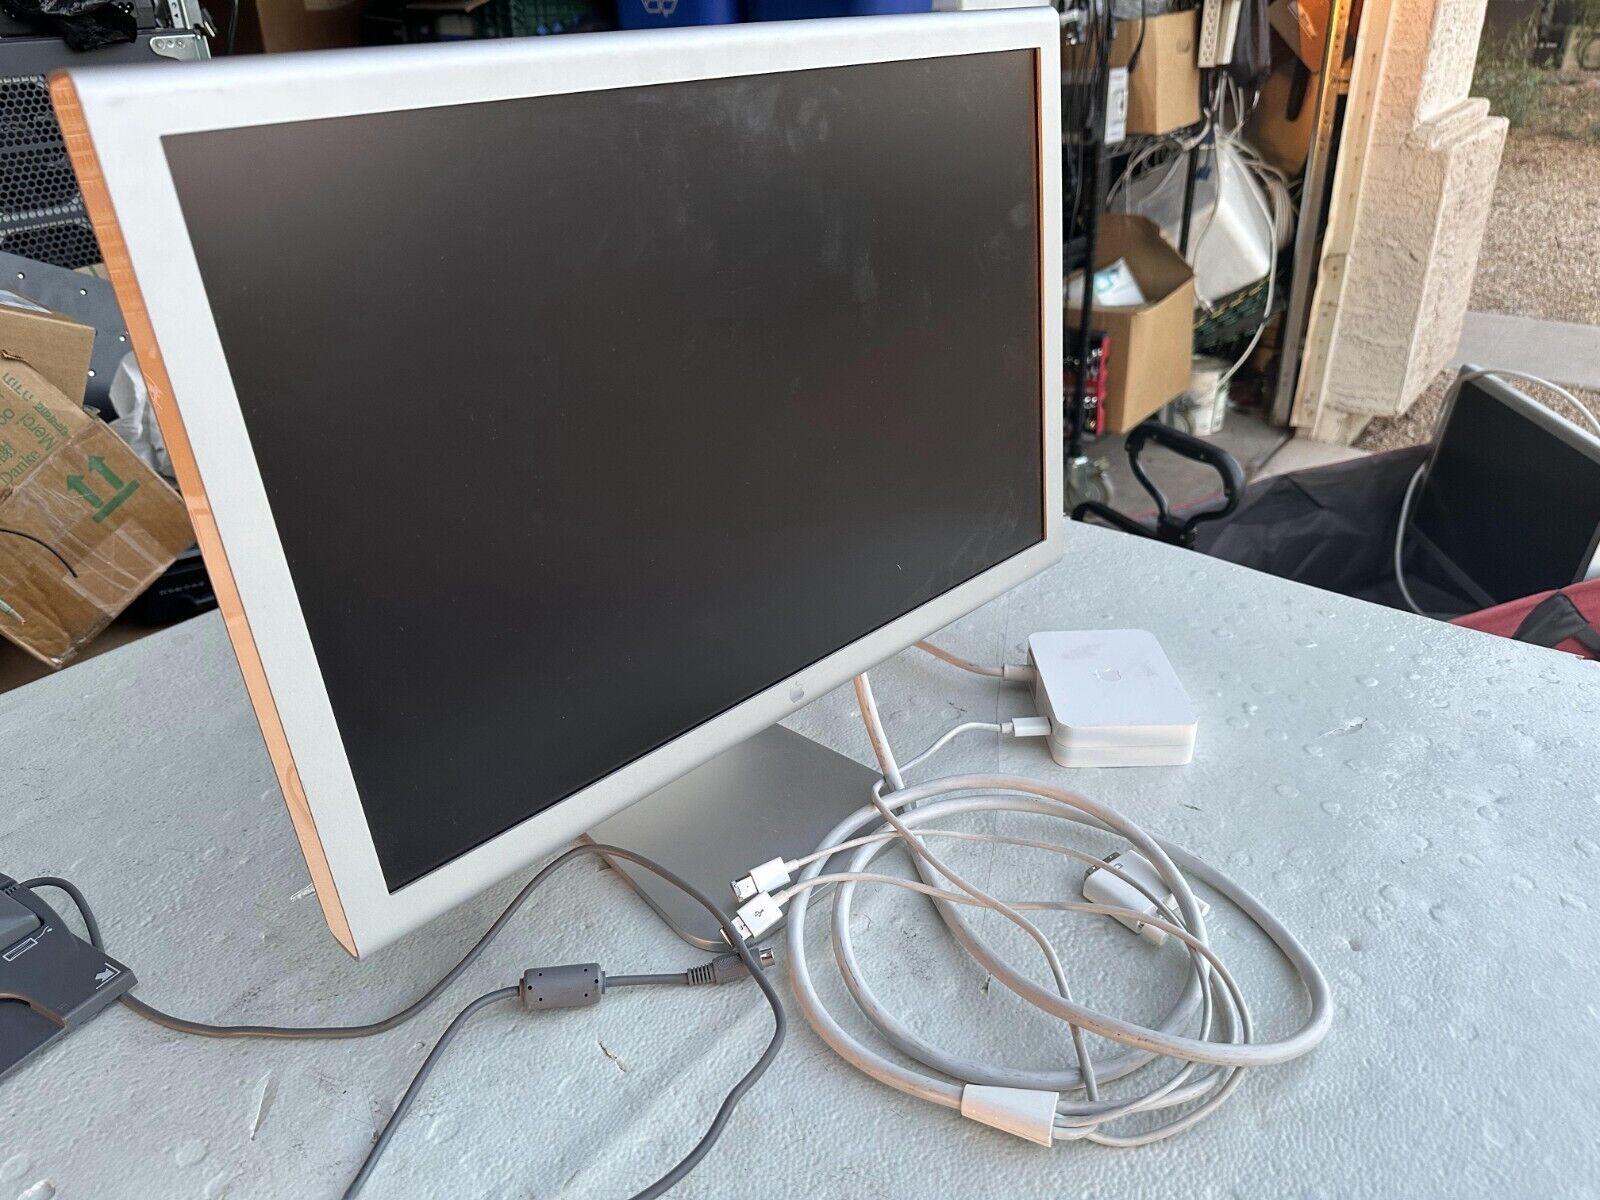 Apple Cinema 20 A1081 Widescreen Silver Aluminum With Brick Power Supply. Works